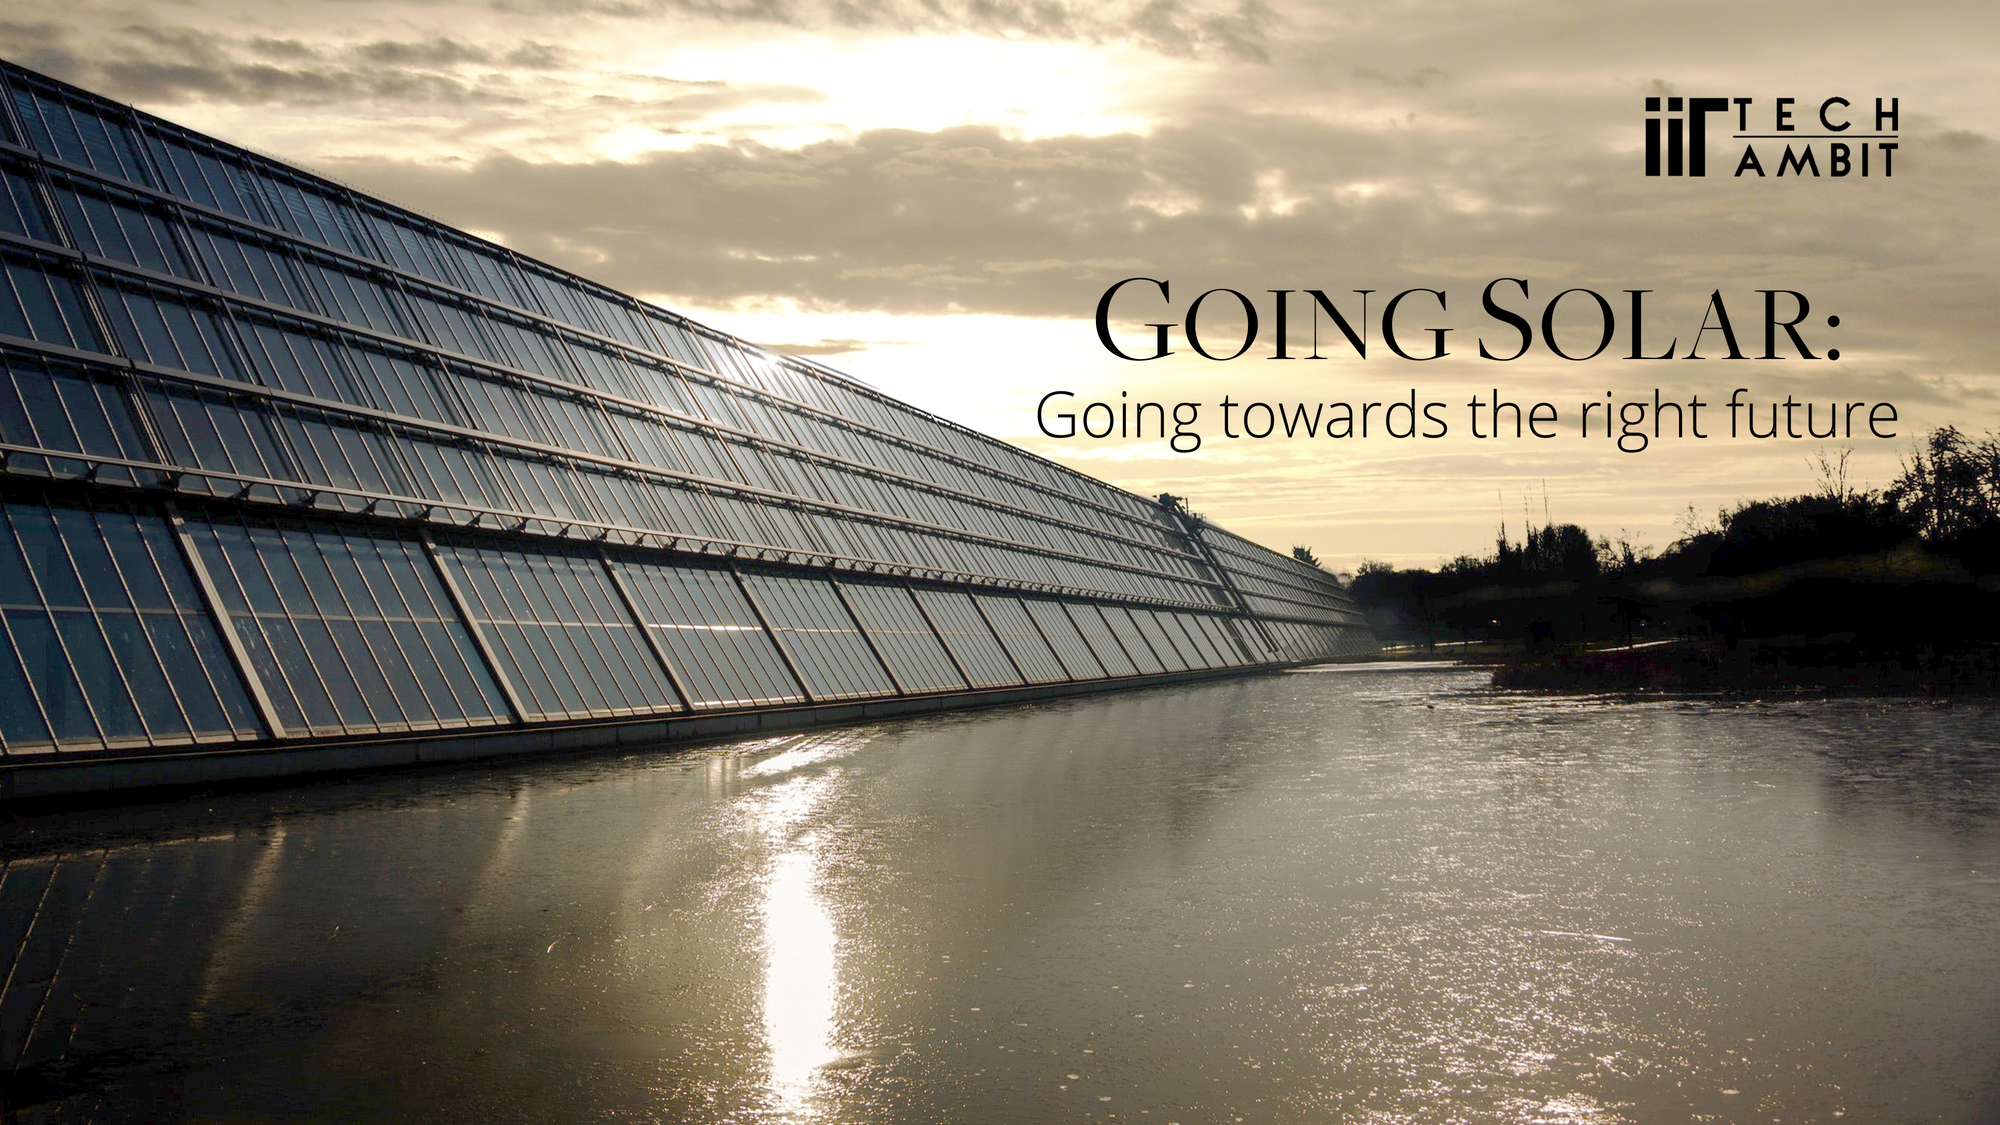 Going solar-going
towards the right future